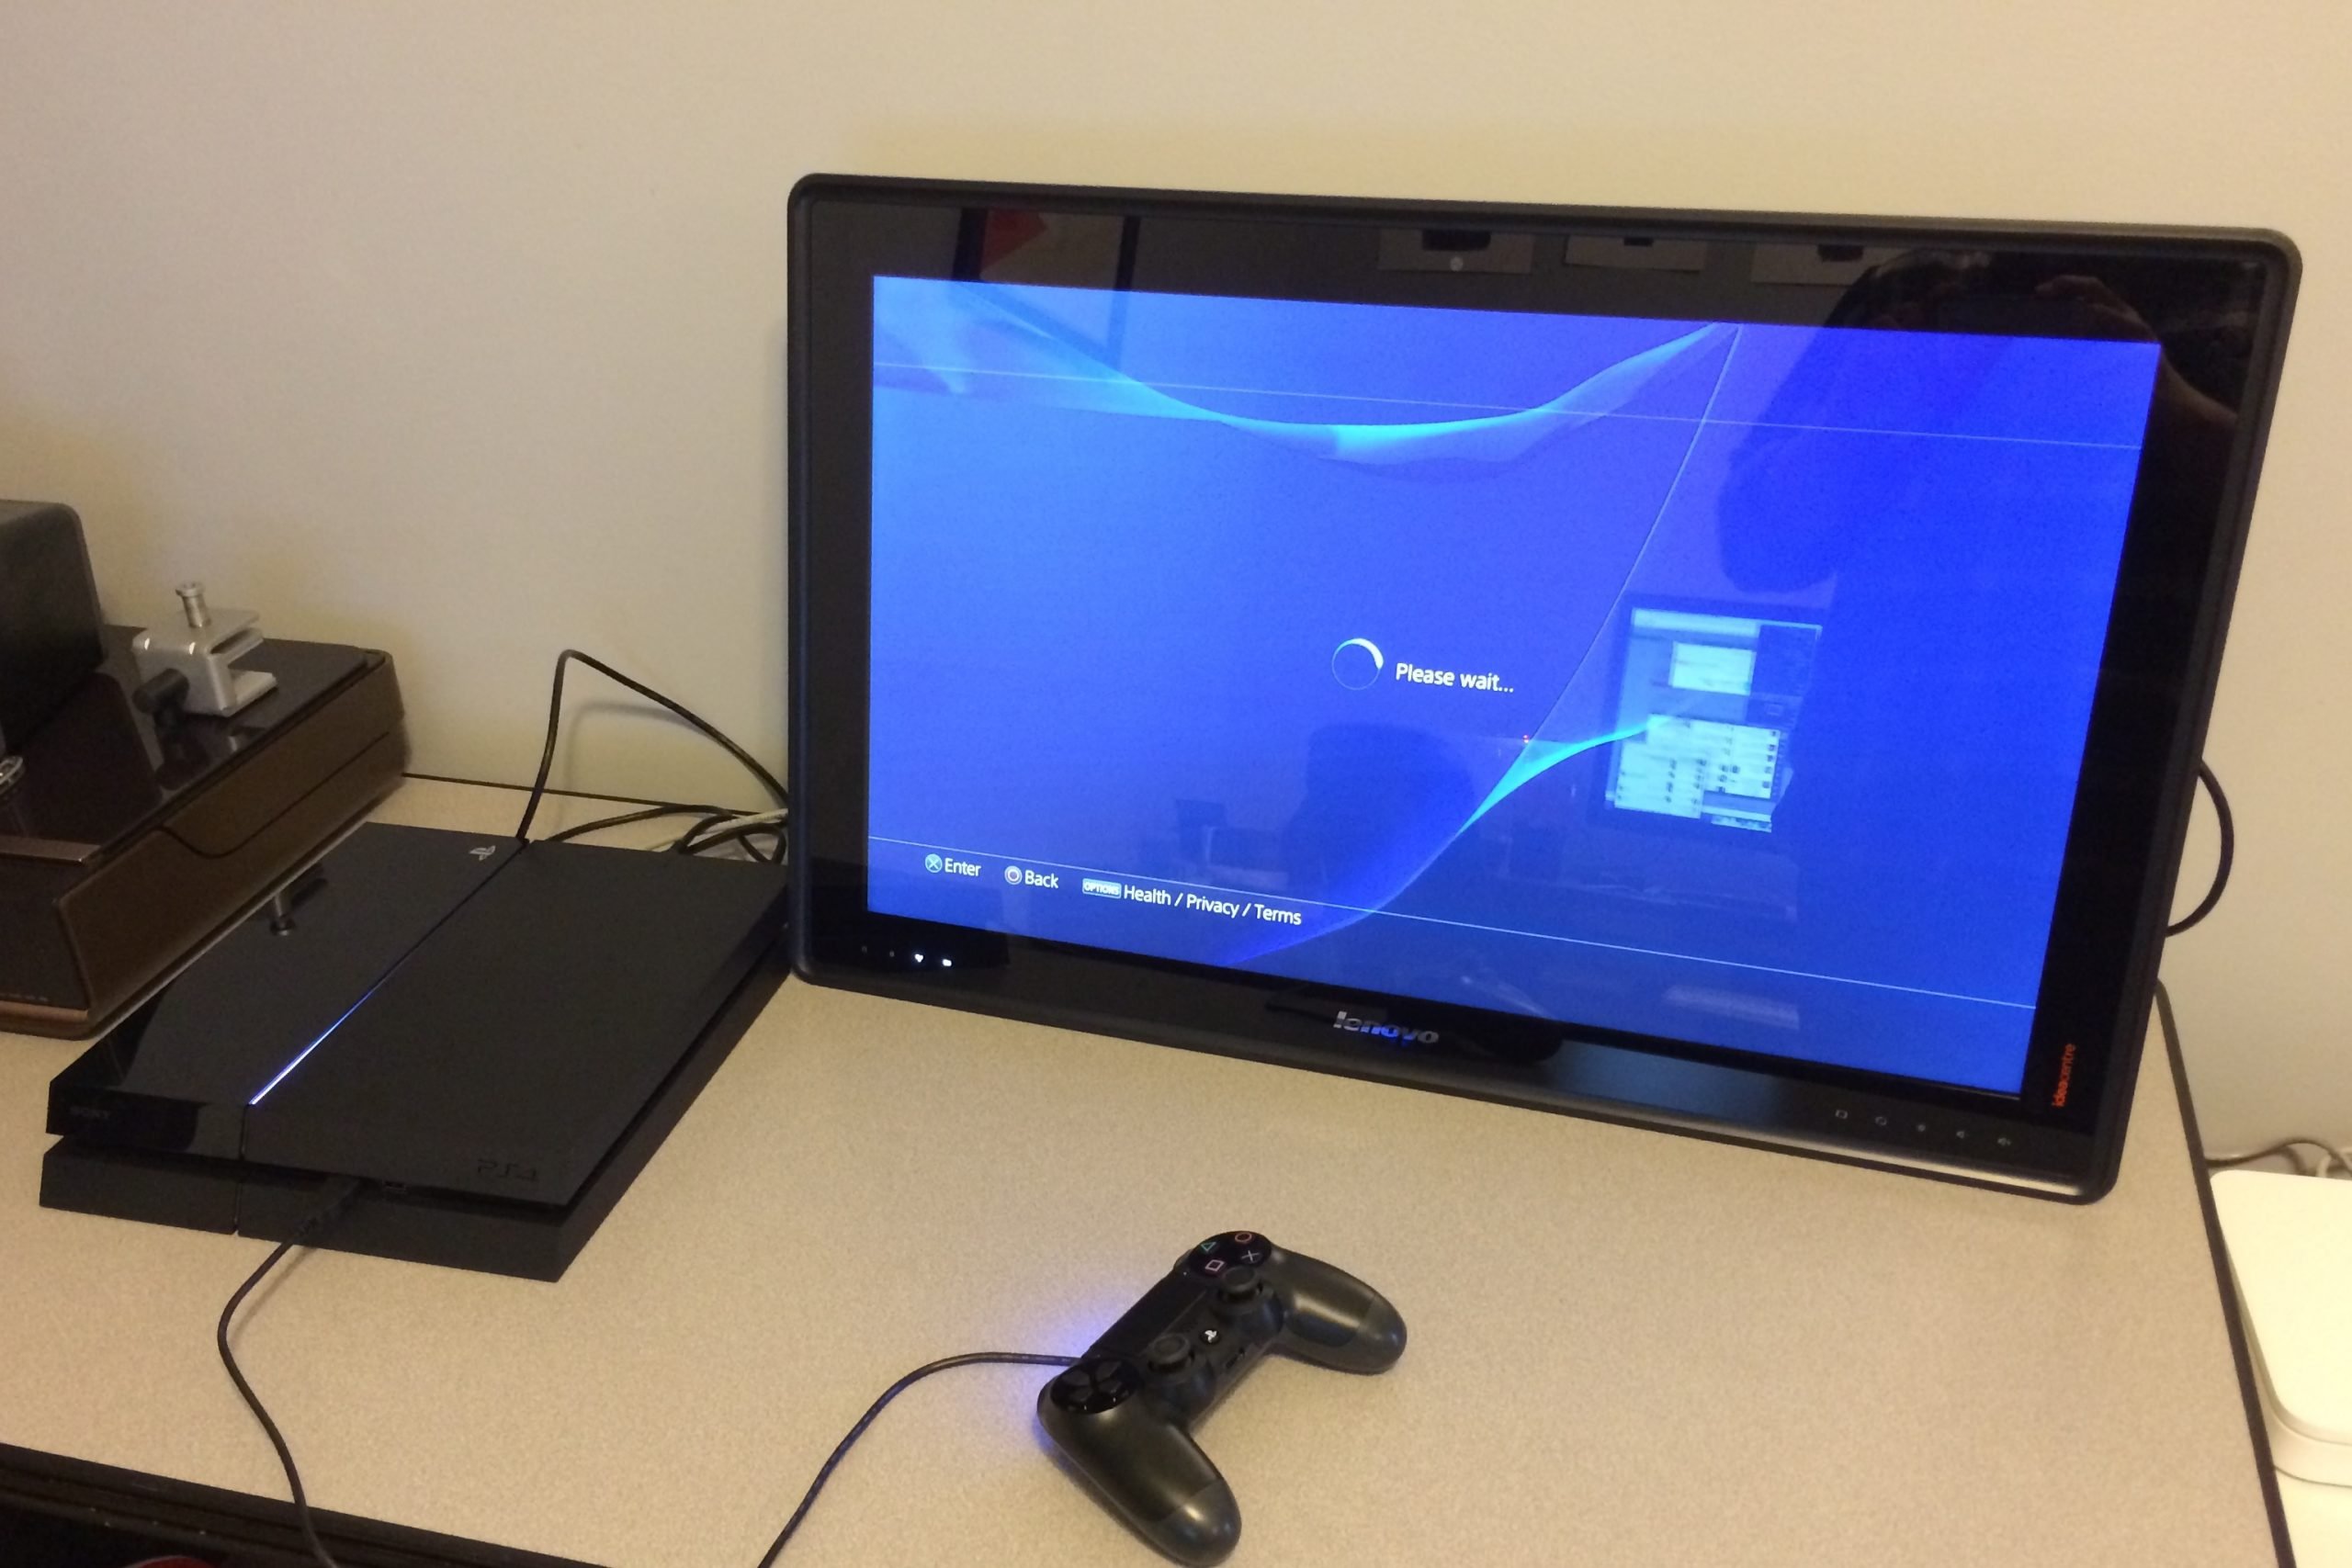 How to Setup the PS4 (Video)